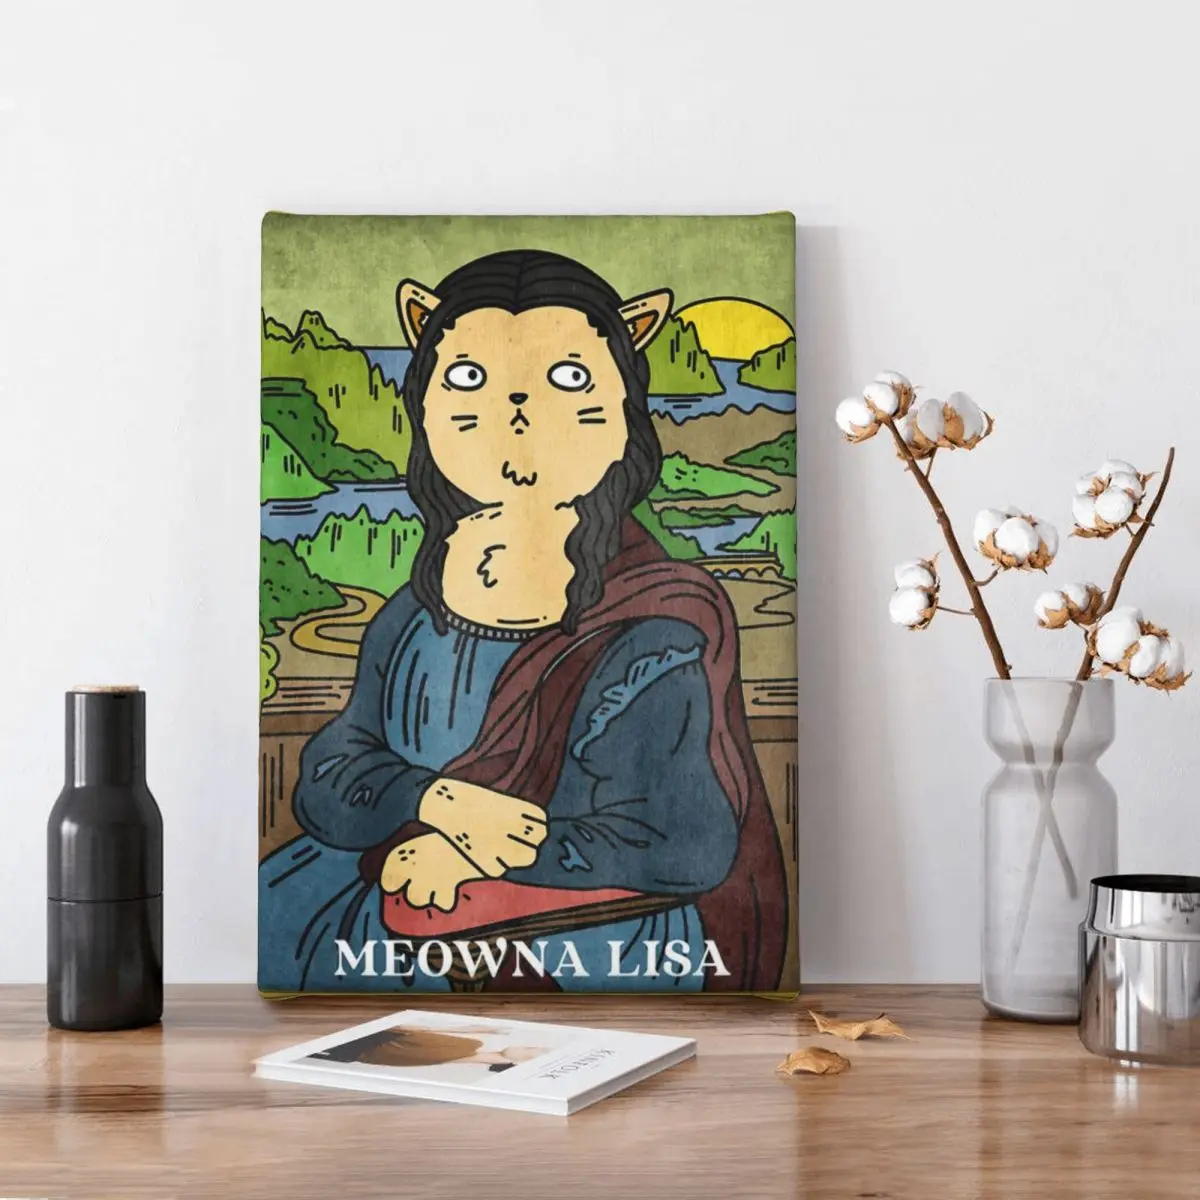 

Funny Famous Paintings Featuring Cats-Mona Lisa Poster and Prints on The Wall Canvas Painting Wall Art Picture for Living Room